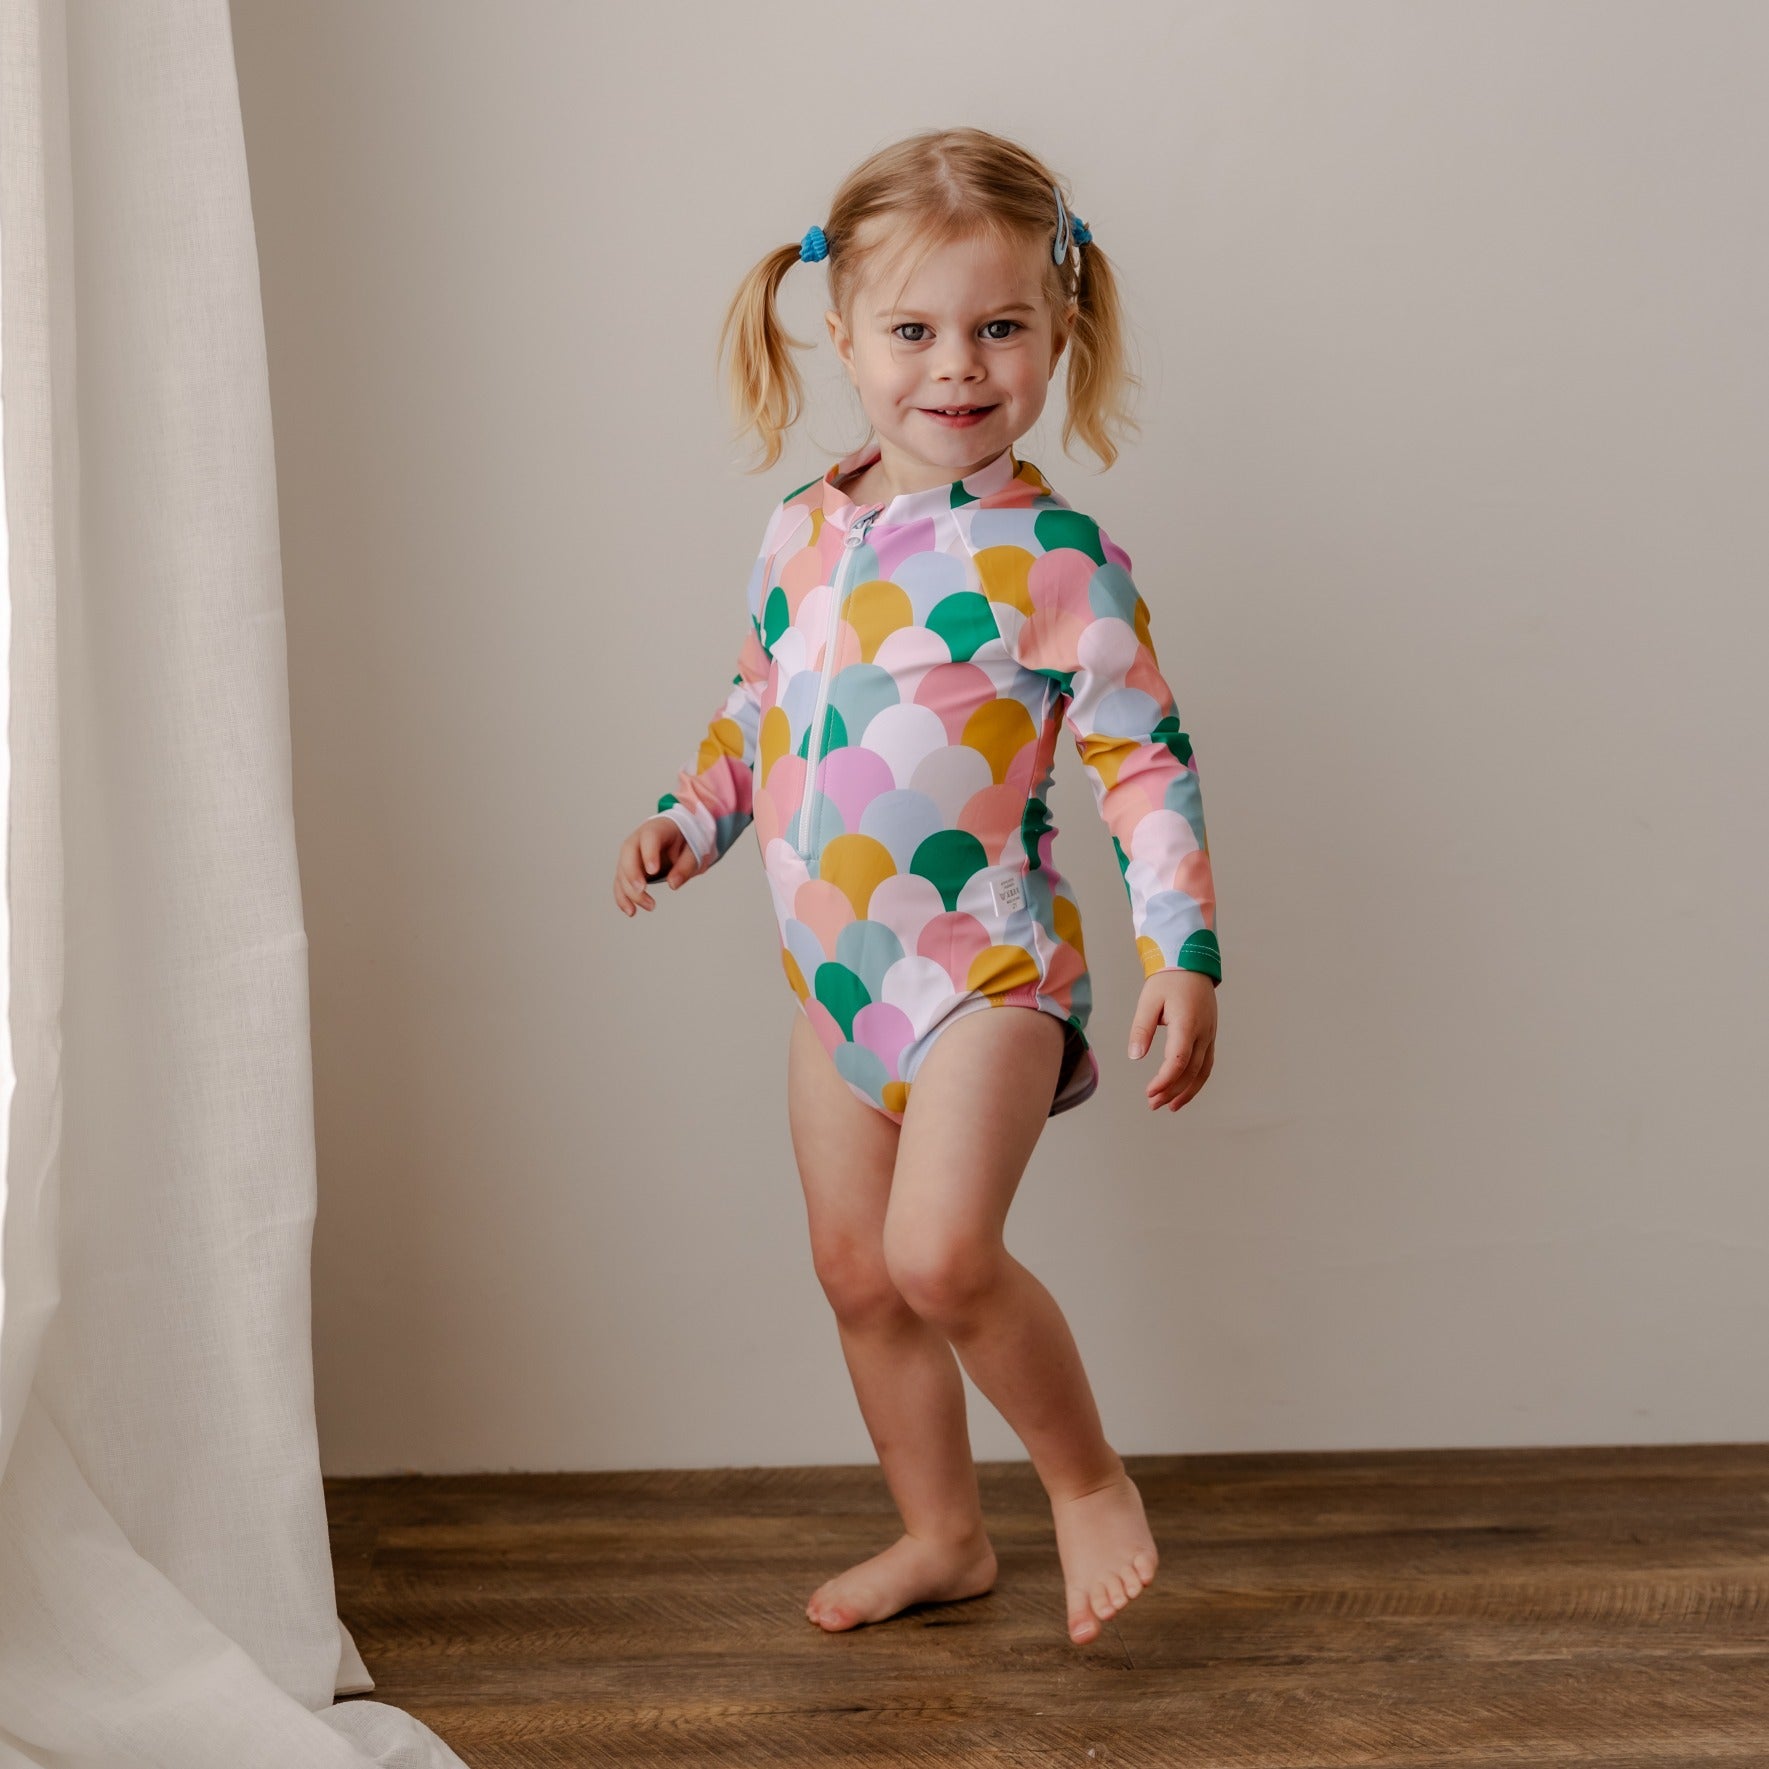 Bear & Moo Swimsuits | Harper in Mermaid Scales | available at Bear & Moo